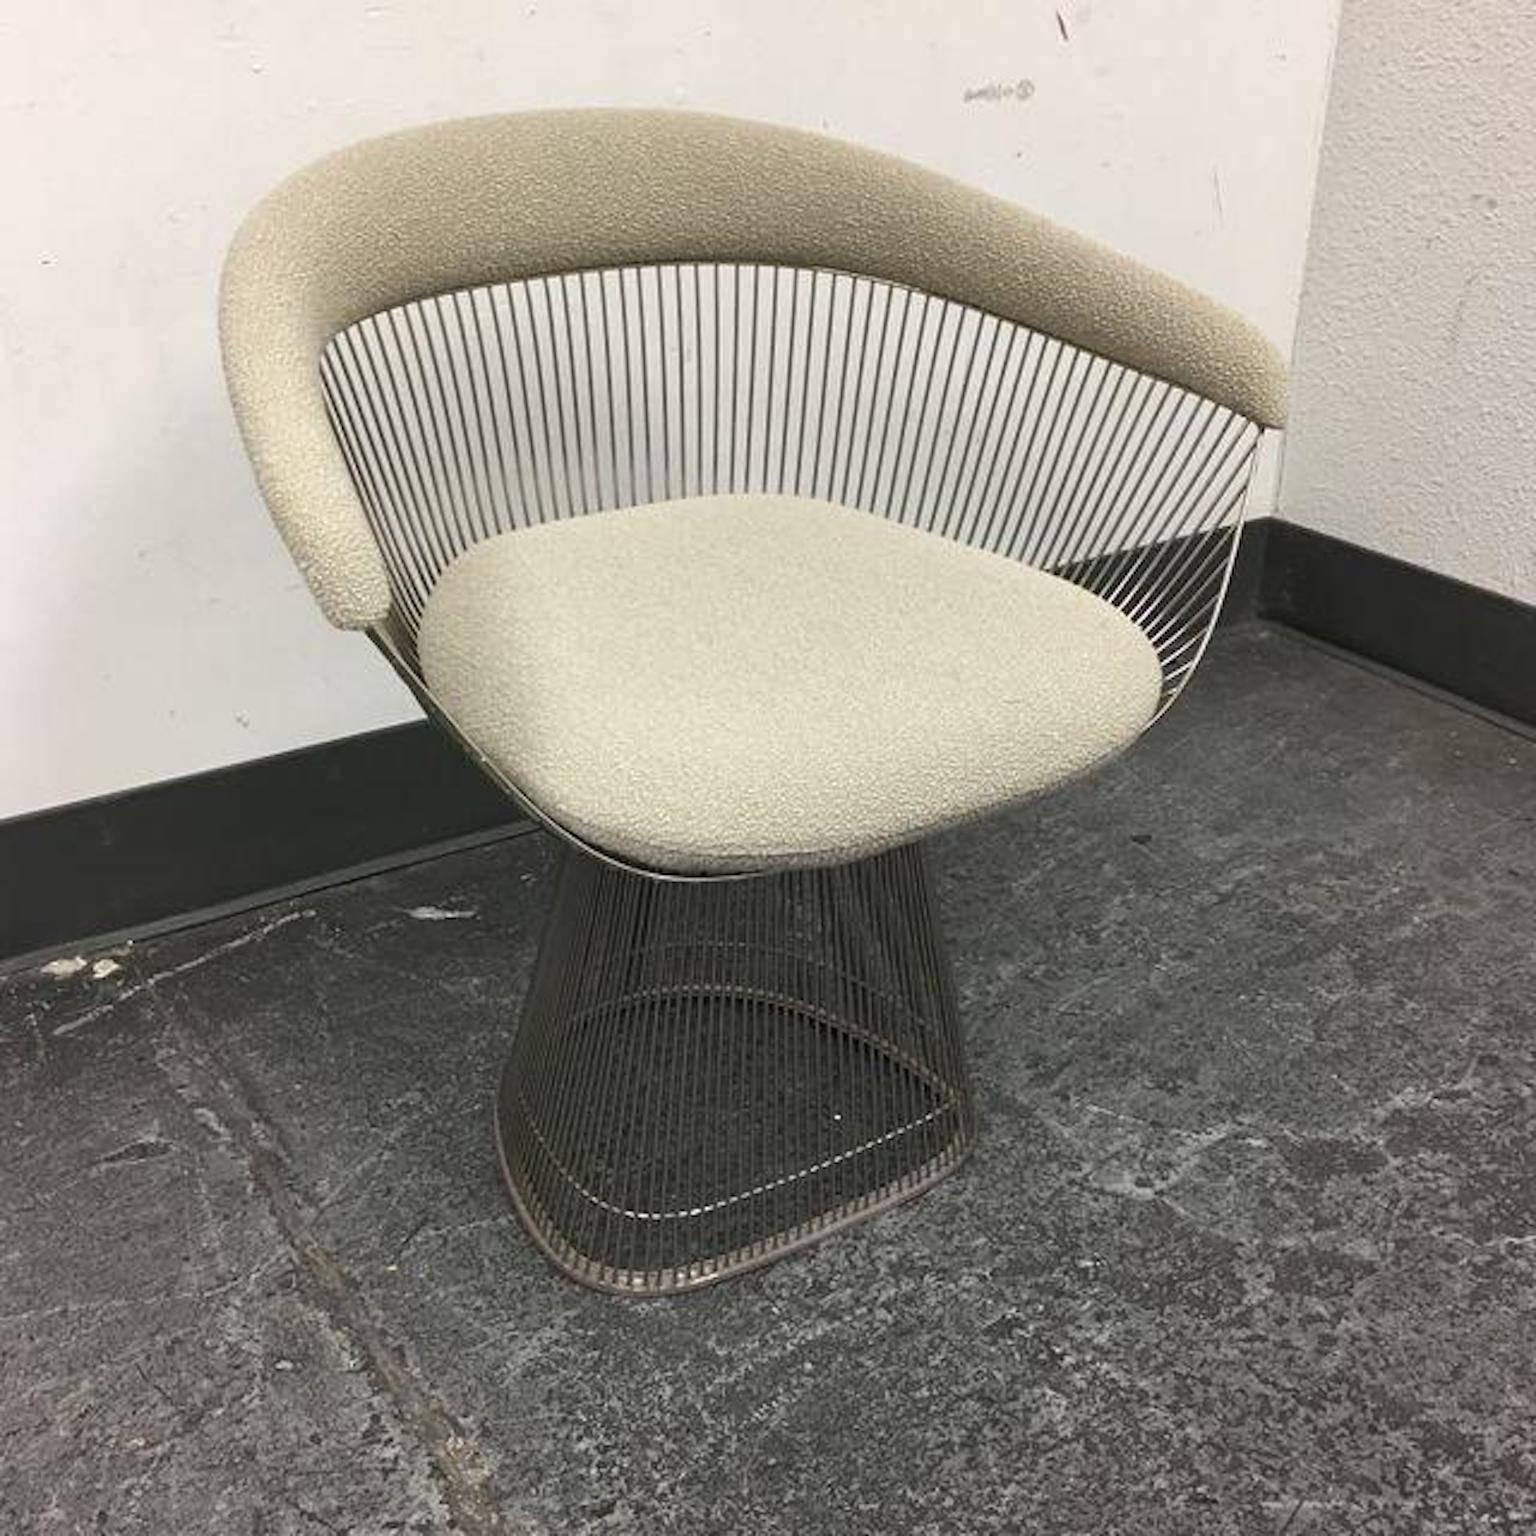 Design Plus Gallery has a Knoll Platner armchair. Designed by Warren Platner in 1966. The chair is comprised of wires which have been welded together in an almost cage design. The steel wires have a nickel finish on them which gives them a smooth